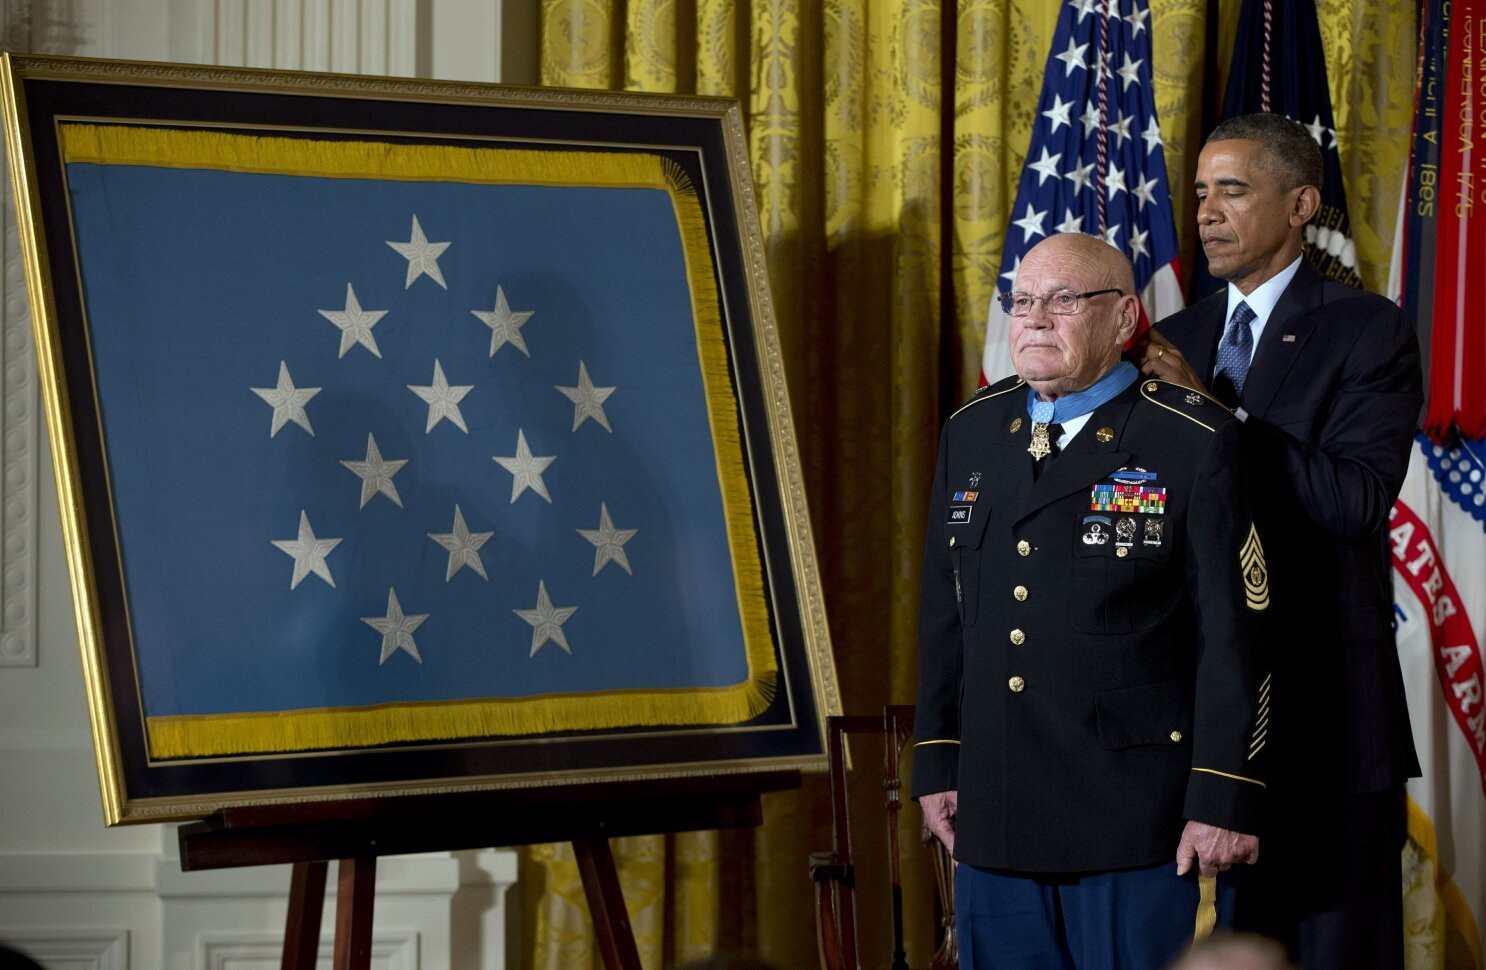 Army sergeant who saved 2 comrades to get Medal of Honor